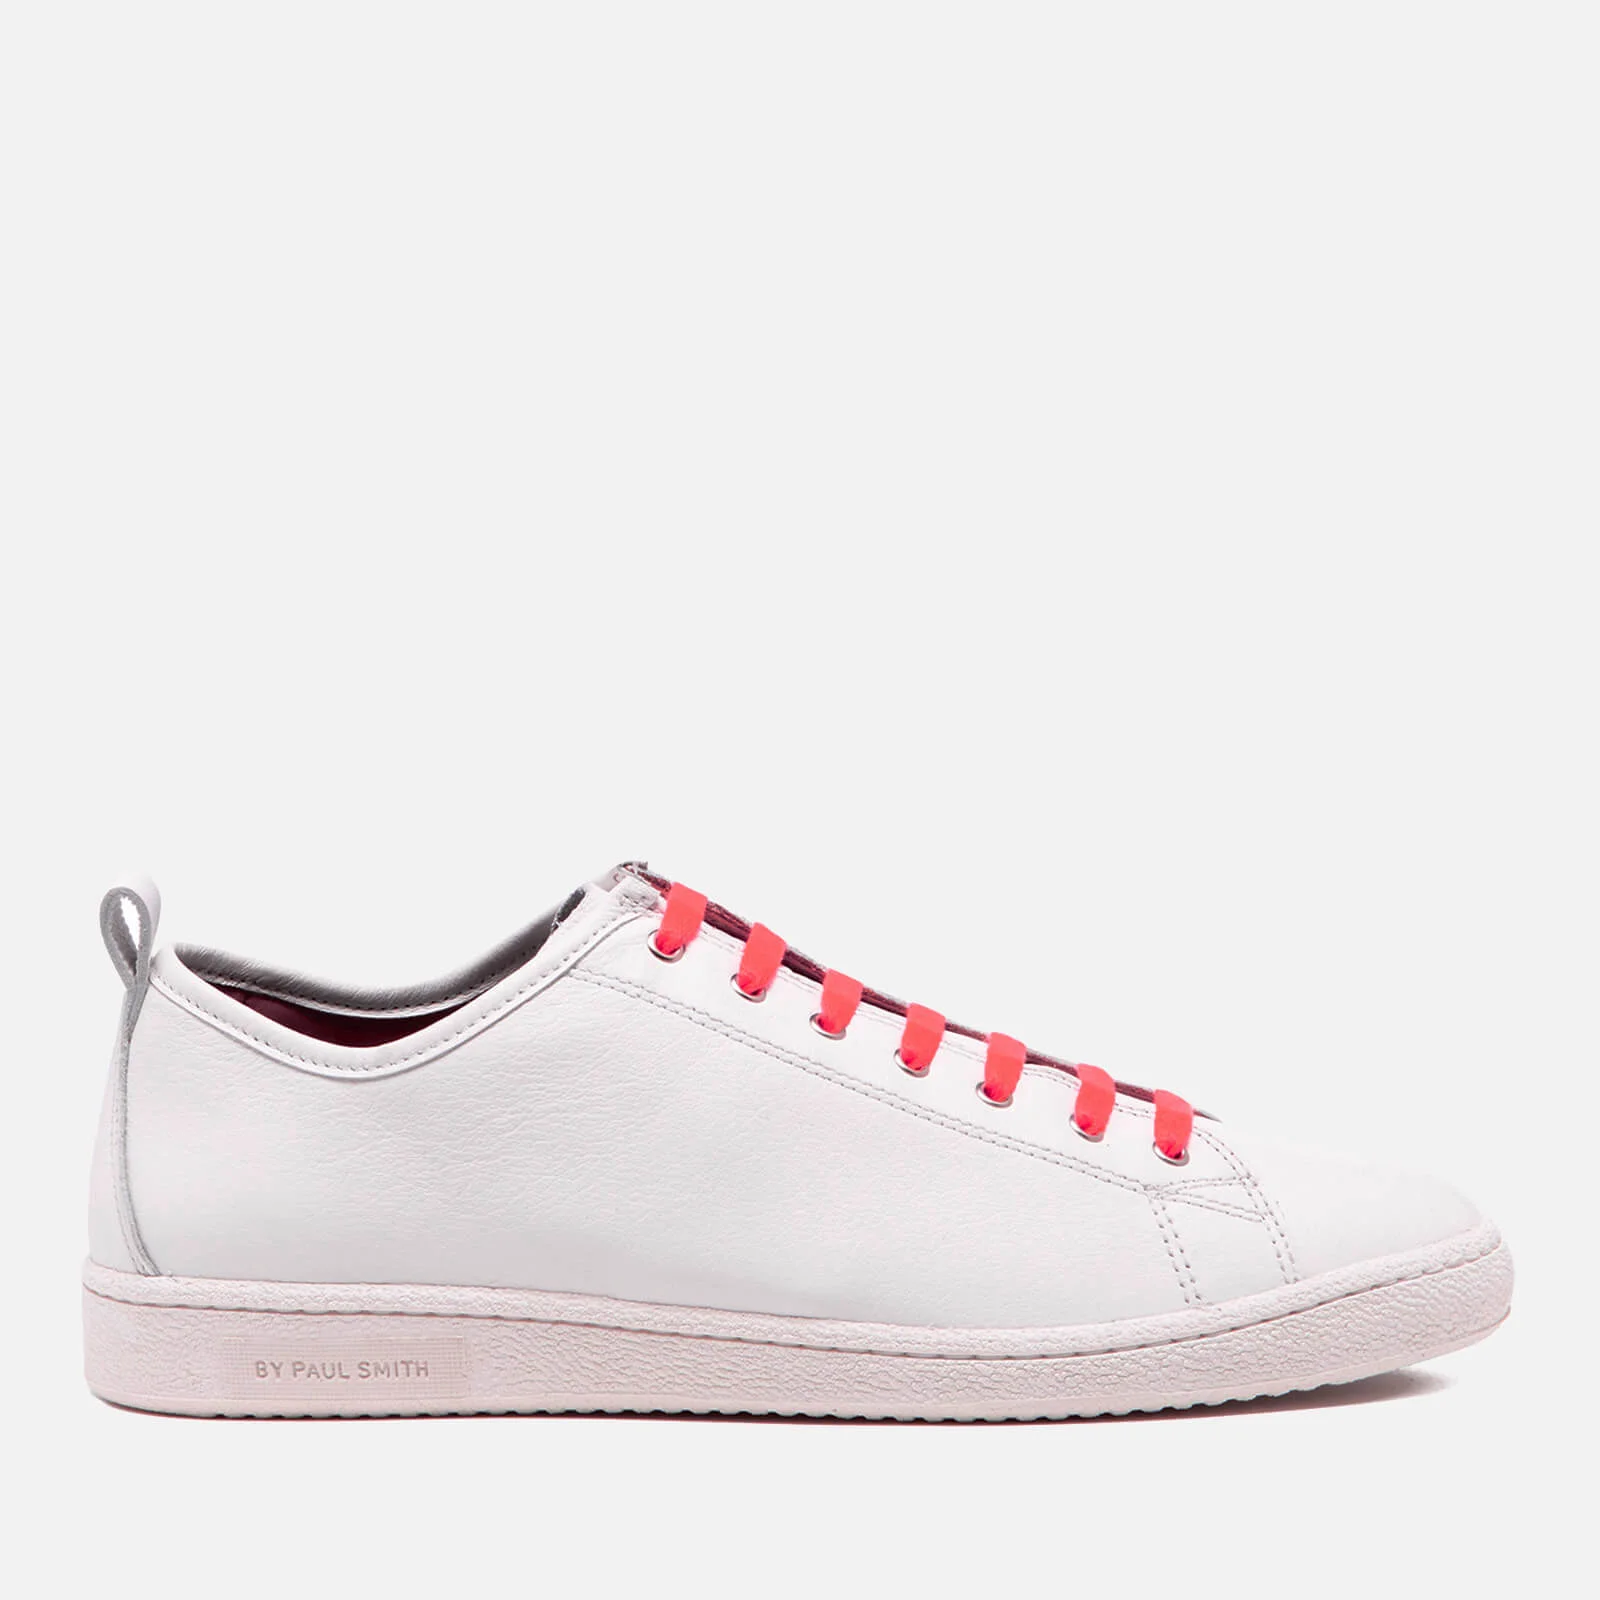 PS by Paul Smith Men's Miyata Leather Trainers - White Classic Calf Image 1